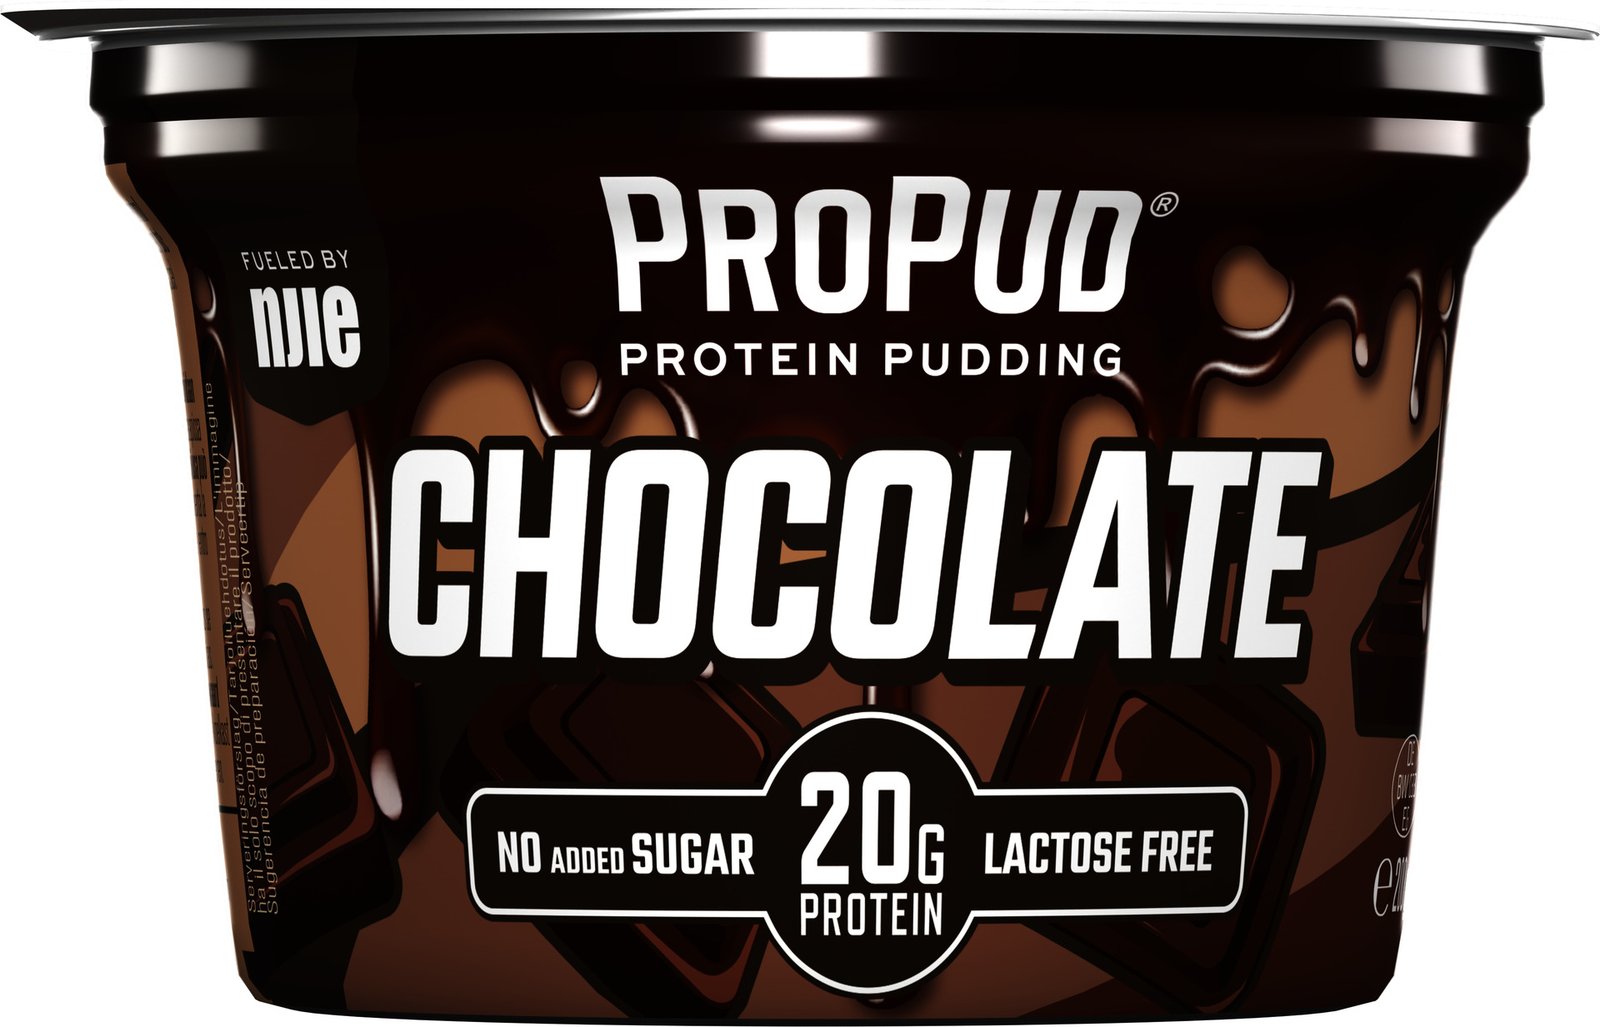 ProPud Protein Pudding Chocolate 200 g